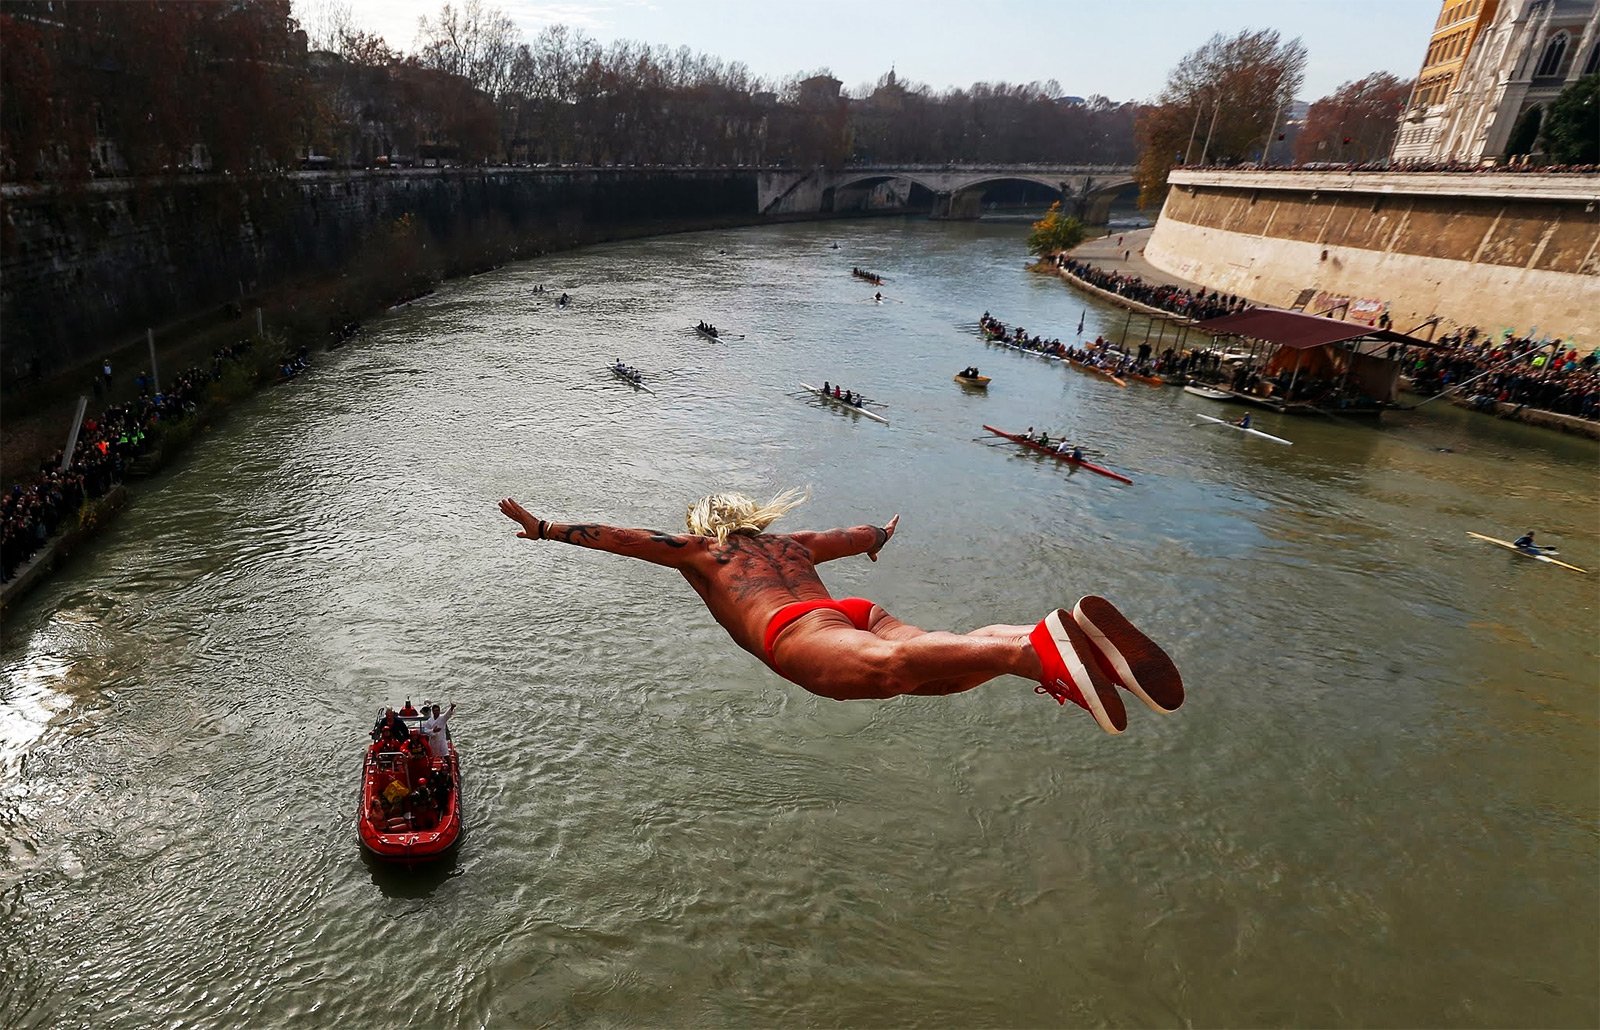 How to jump into Tiber river on the 1st of January in Rome